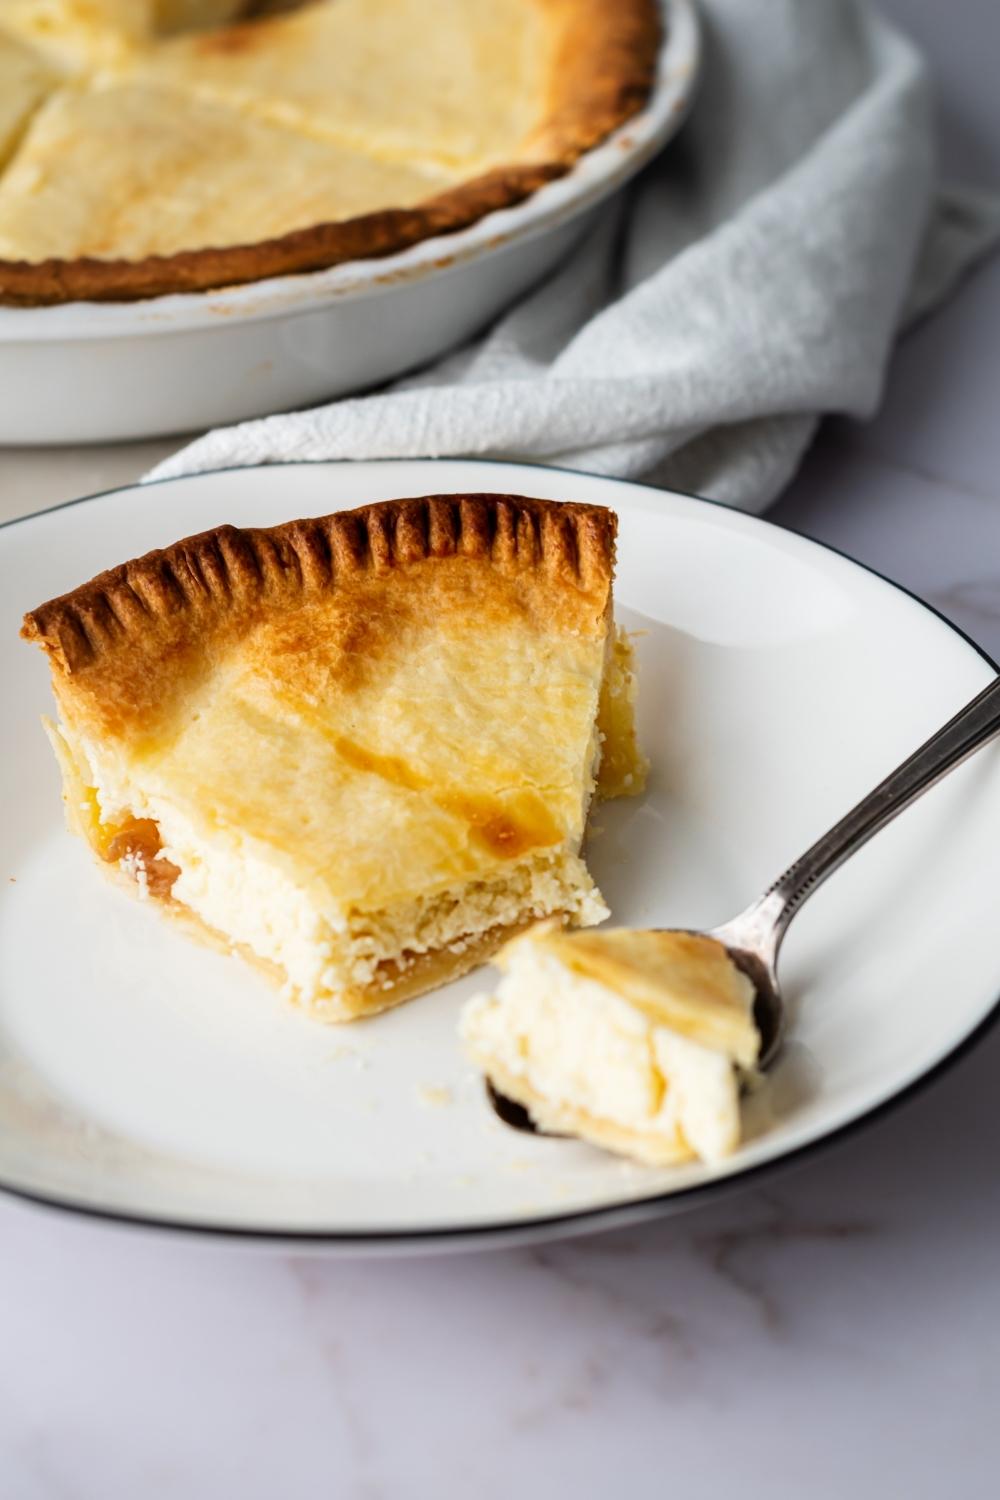 A slice of ricotta pie with a piece out of the front on a white plate. A spoon is on the plate with the piece of the pie on it.